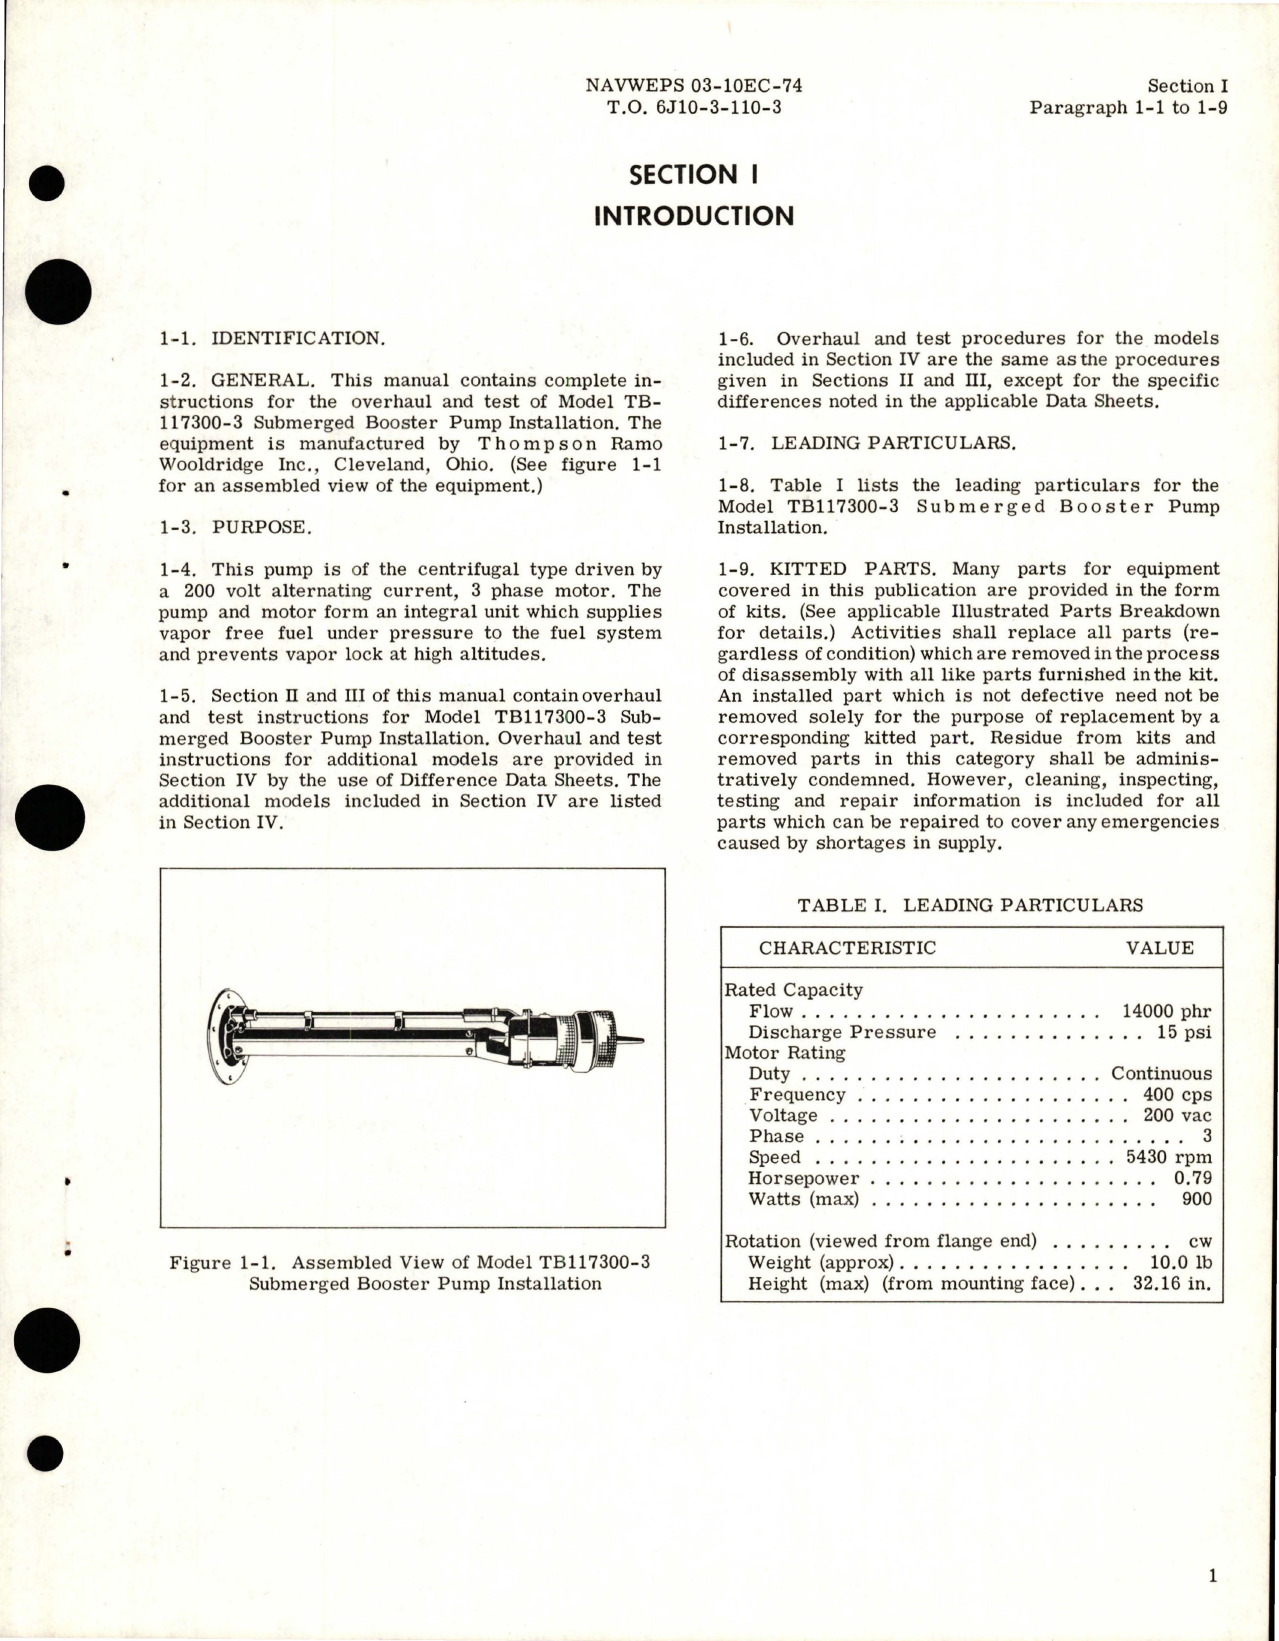 Sample page 5 from AirCorps Library document: Overhaul for Submerged Booster Pump - Models TB117300-3, TB117300-5 and 245200-1